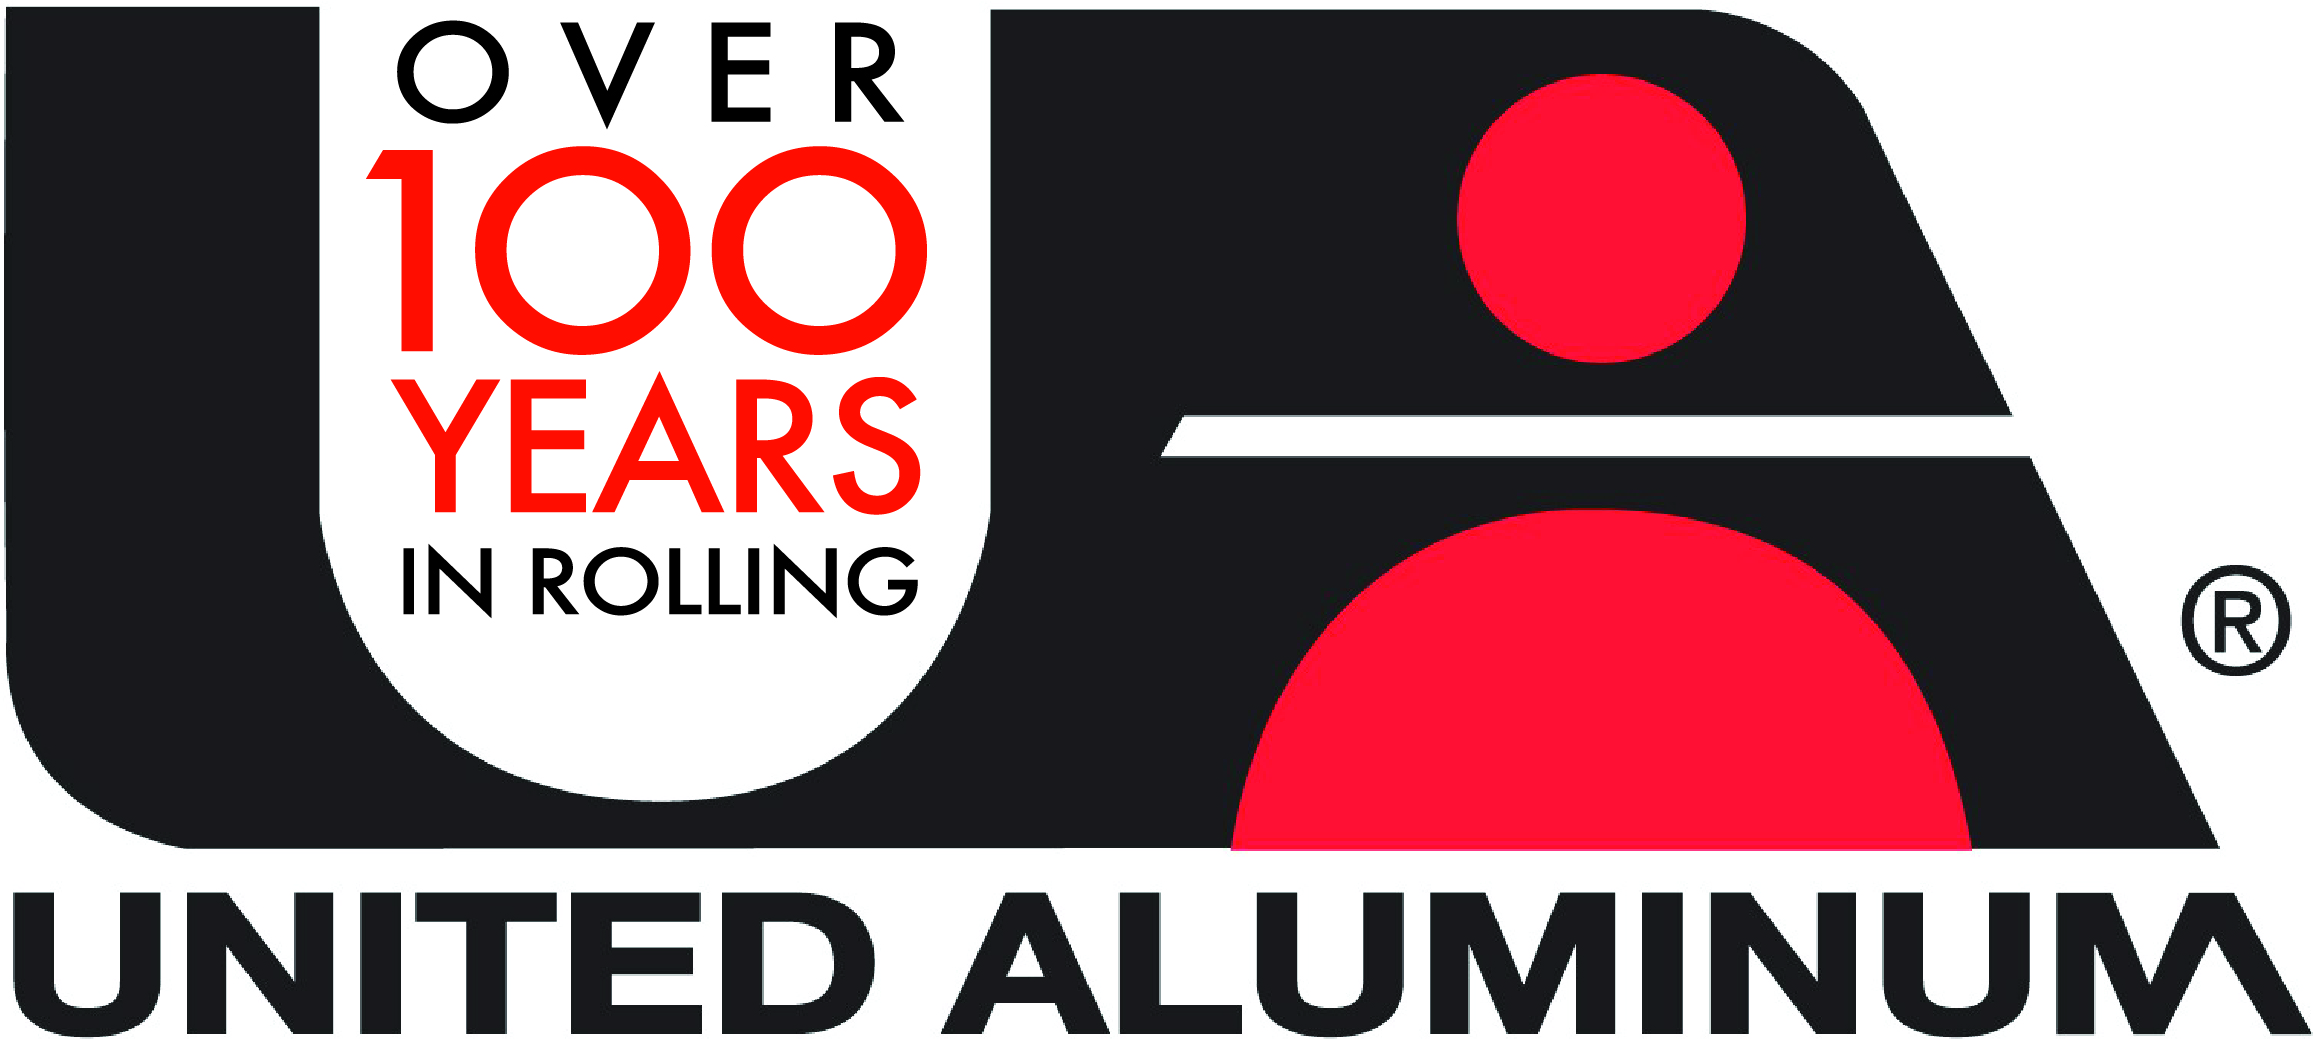 United Aluminum - Over 100 Years in Rolling